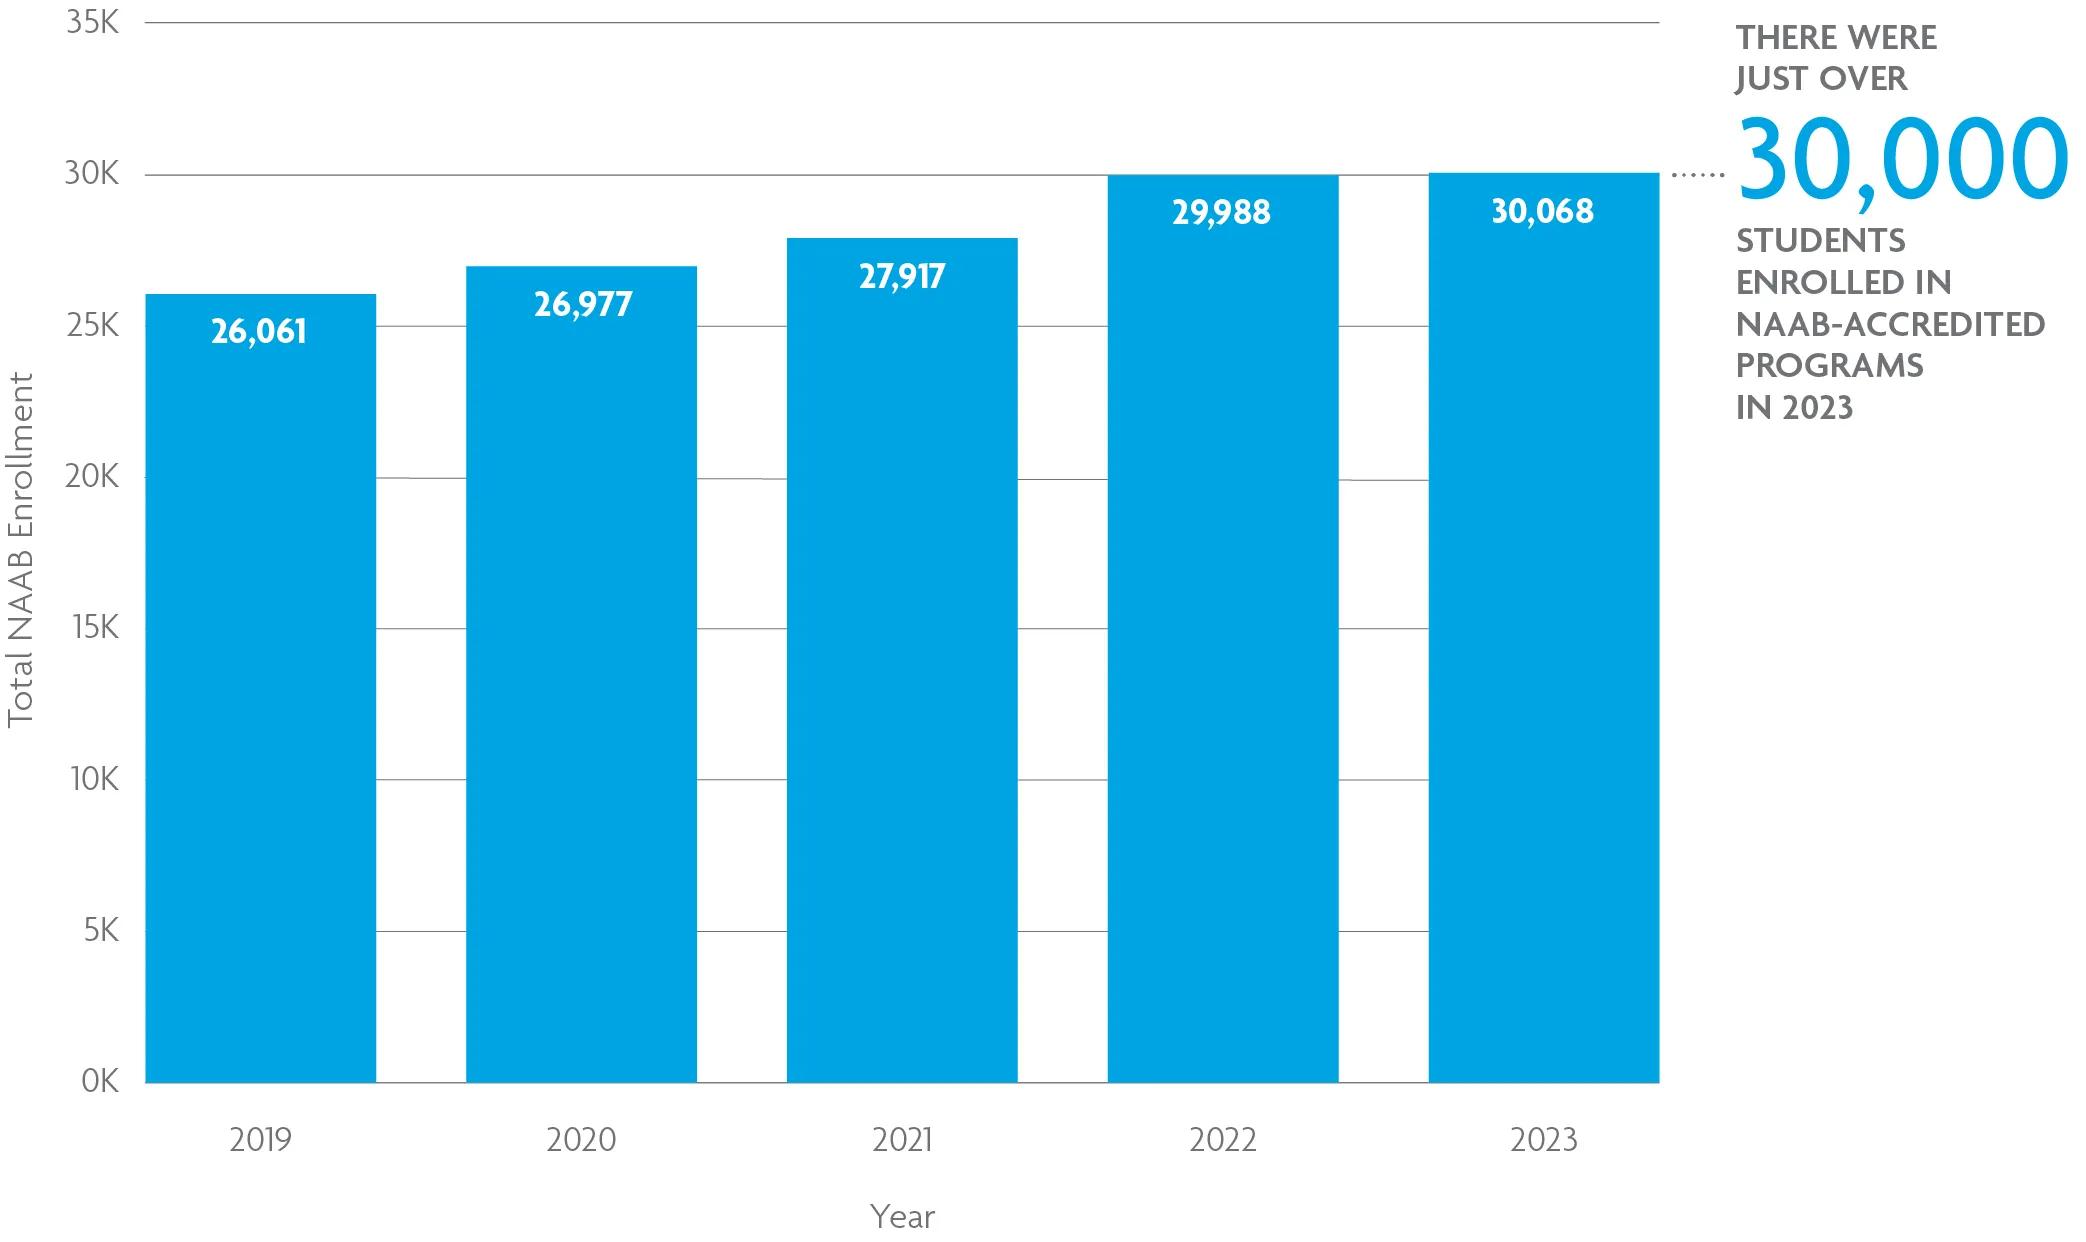 A bar chart shows that over 30,000 students were enrolled in NAAB-accredited programs in 2023. For help with data accessibility, contact communications@ncarb.org. 